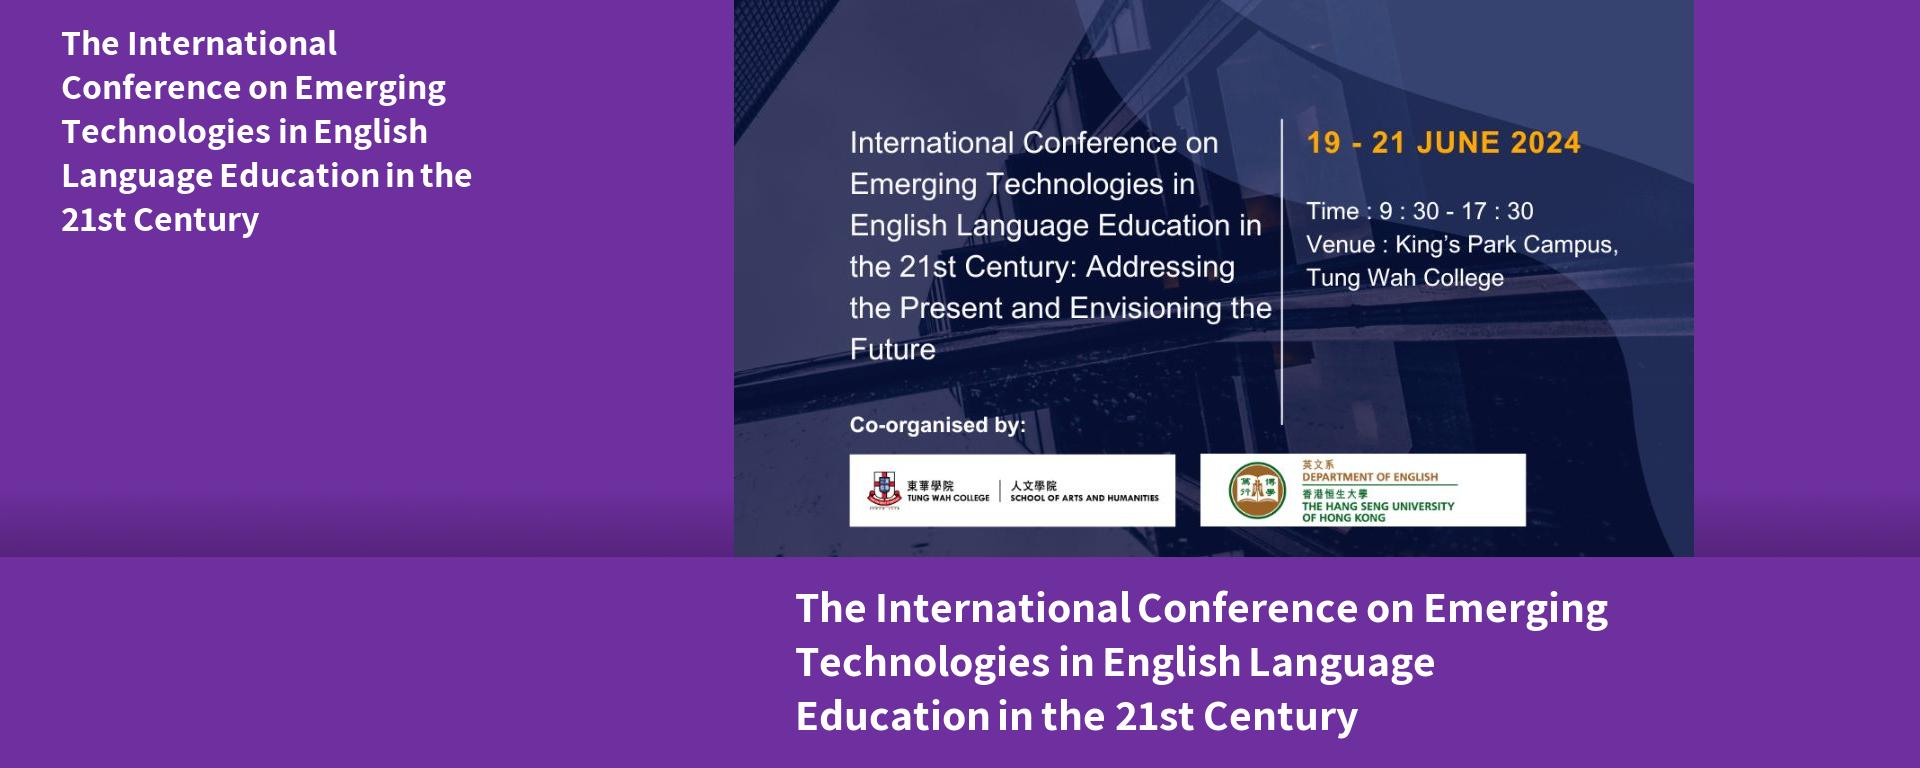 The International Conference on Emerging Technologies in English Language Education in the 21st Century: Addressing the Present and Envisioning